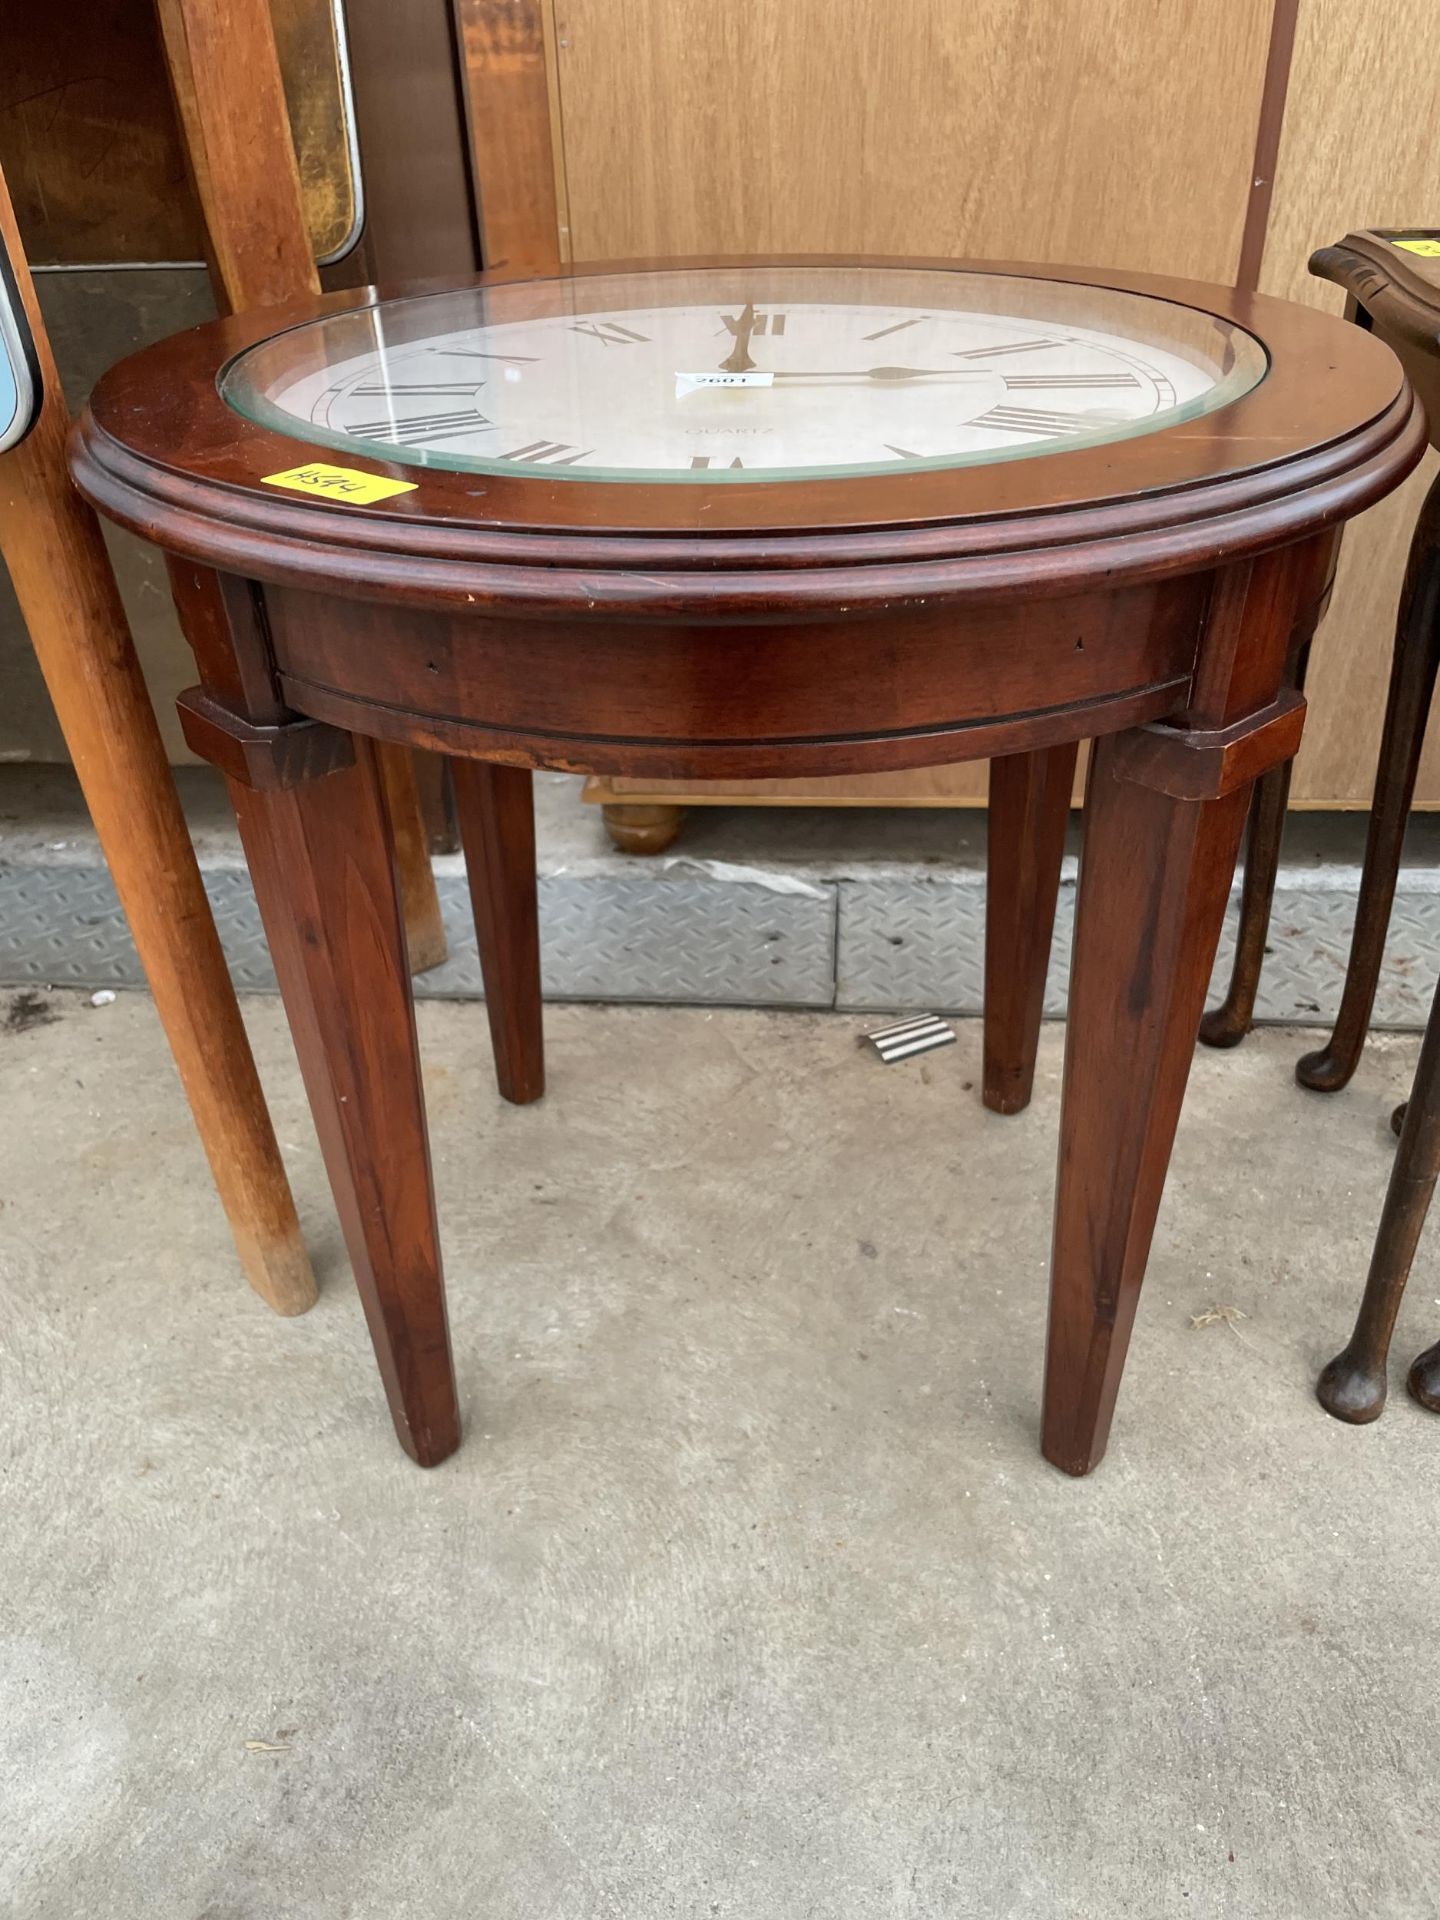 A 22" DIAMETER OCCASIONAL TABLE, THE GLASS TOP REVEALING QUARTZ CLOCK WITH ROMAN NUMERALS - Image 2 of 2